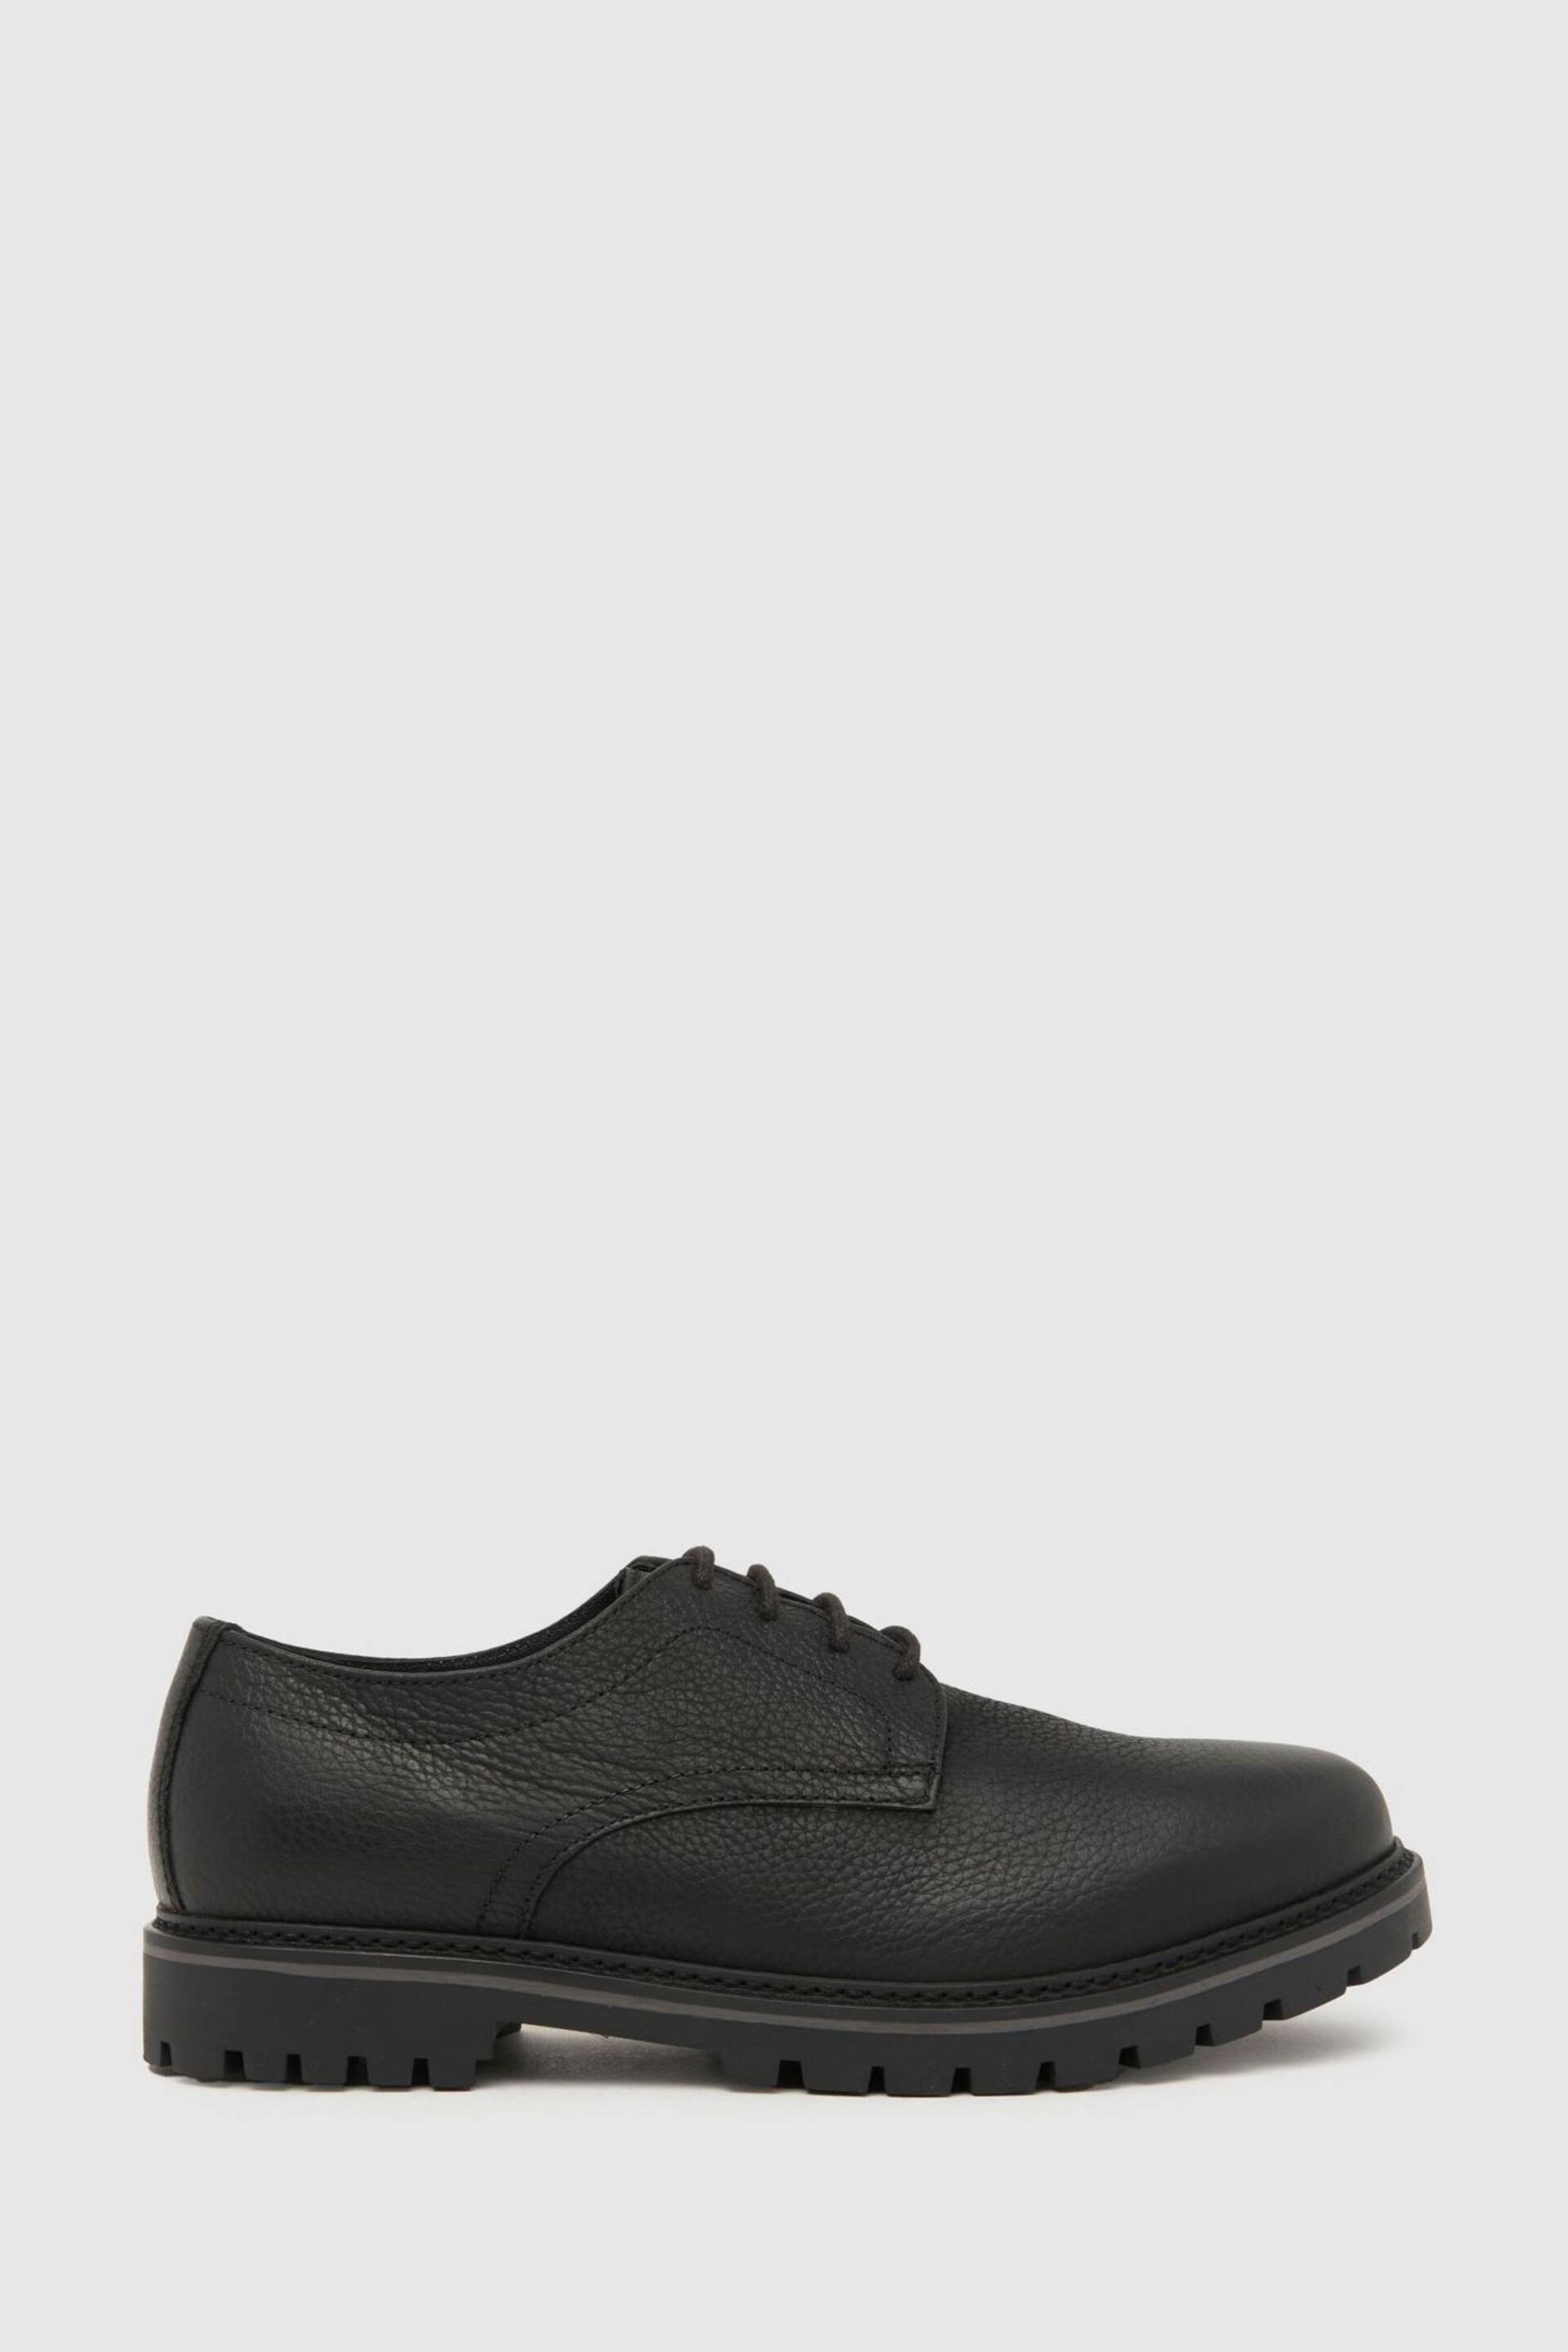 Schuh Paxon Leather Lace-Up Black Shoes - Image 2 of 4